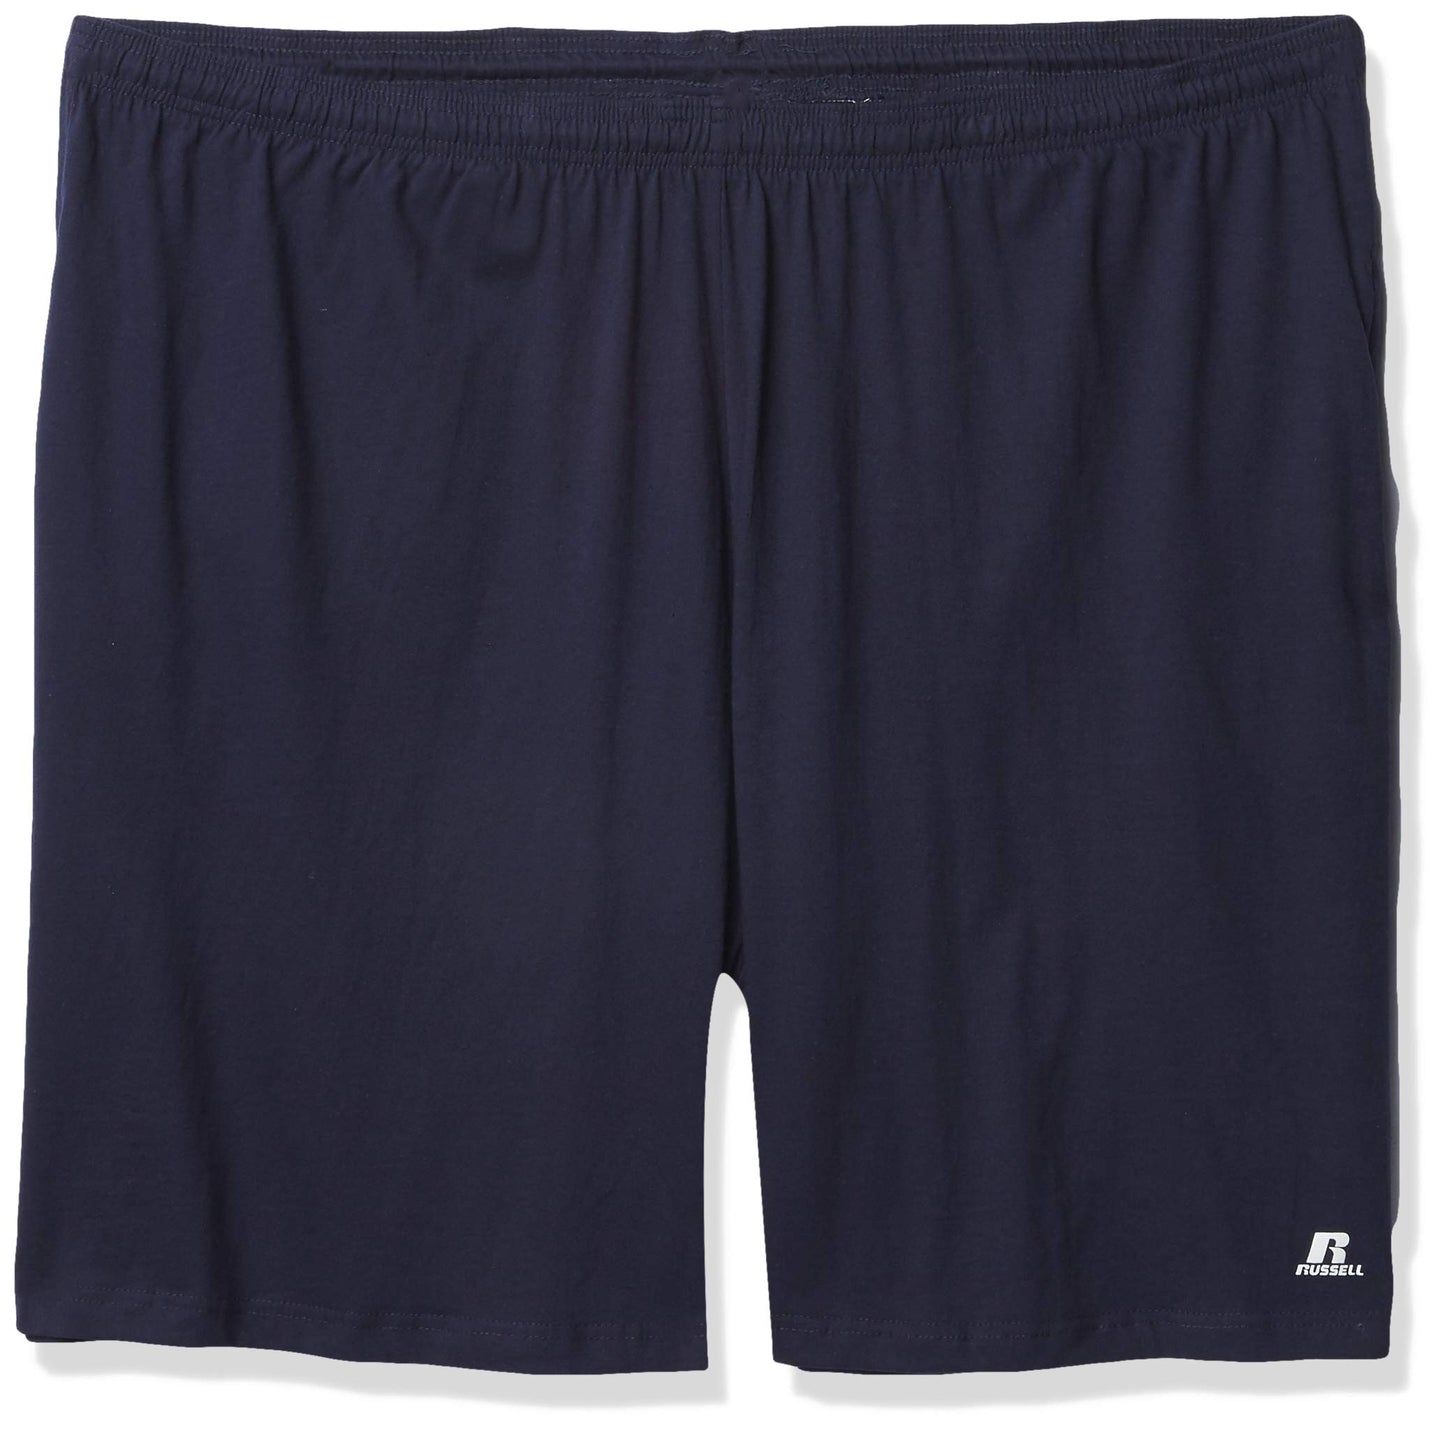 Russell Athletic Big & Tall Gym Shorts for Men